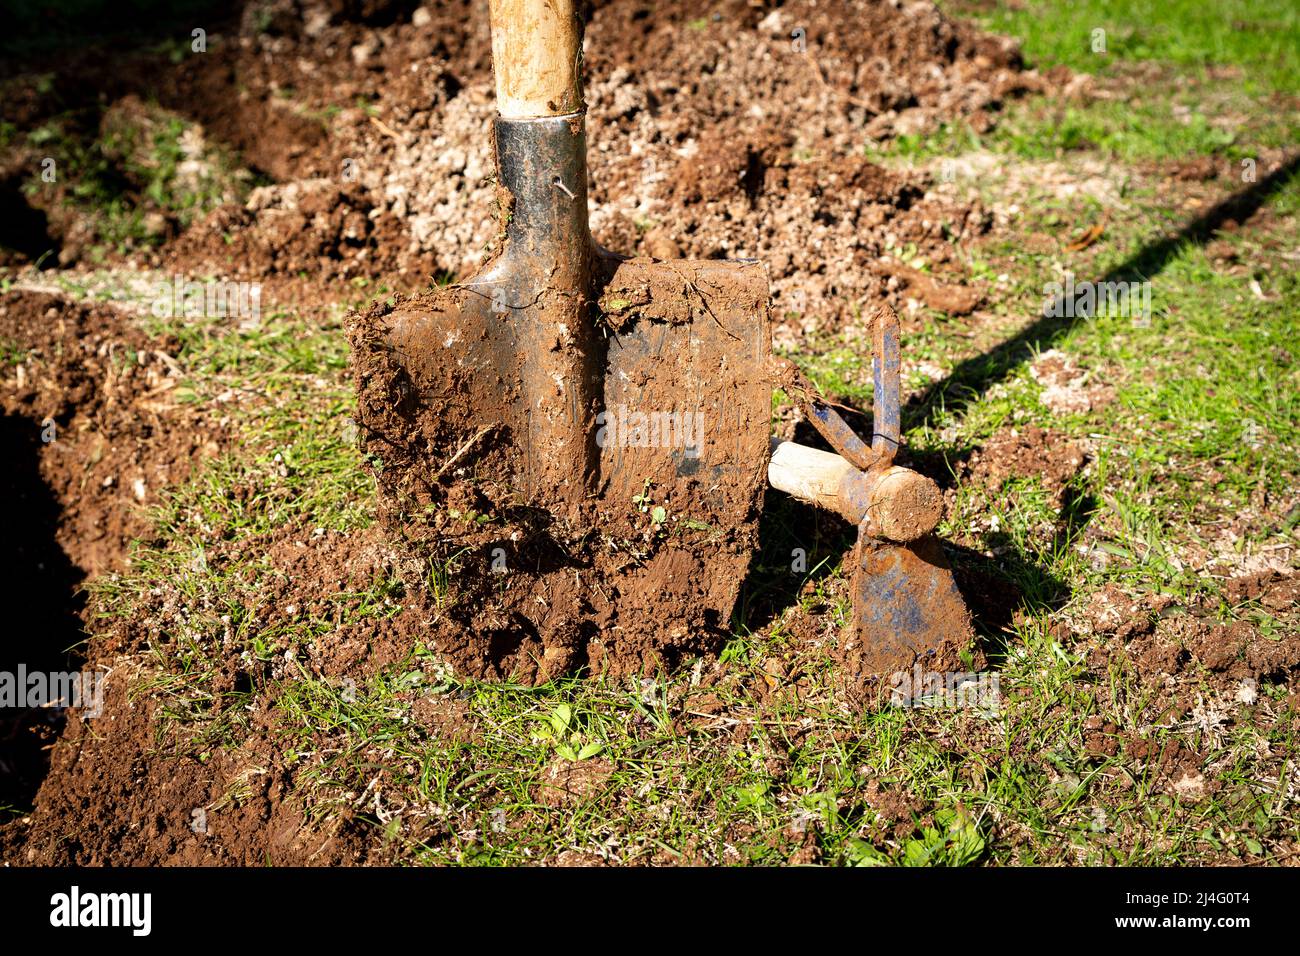 Used garden shovel and hoe with soil in selective focus. There are pits dug out of focus. Gardening, spring, agriculture concept. Stock Photo